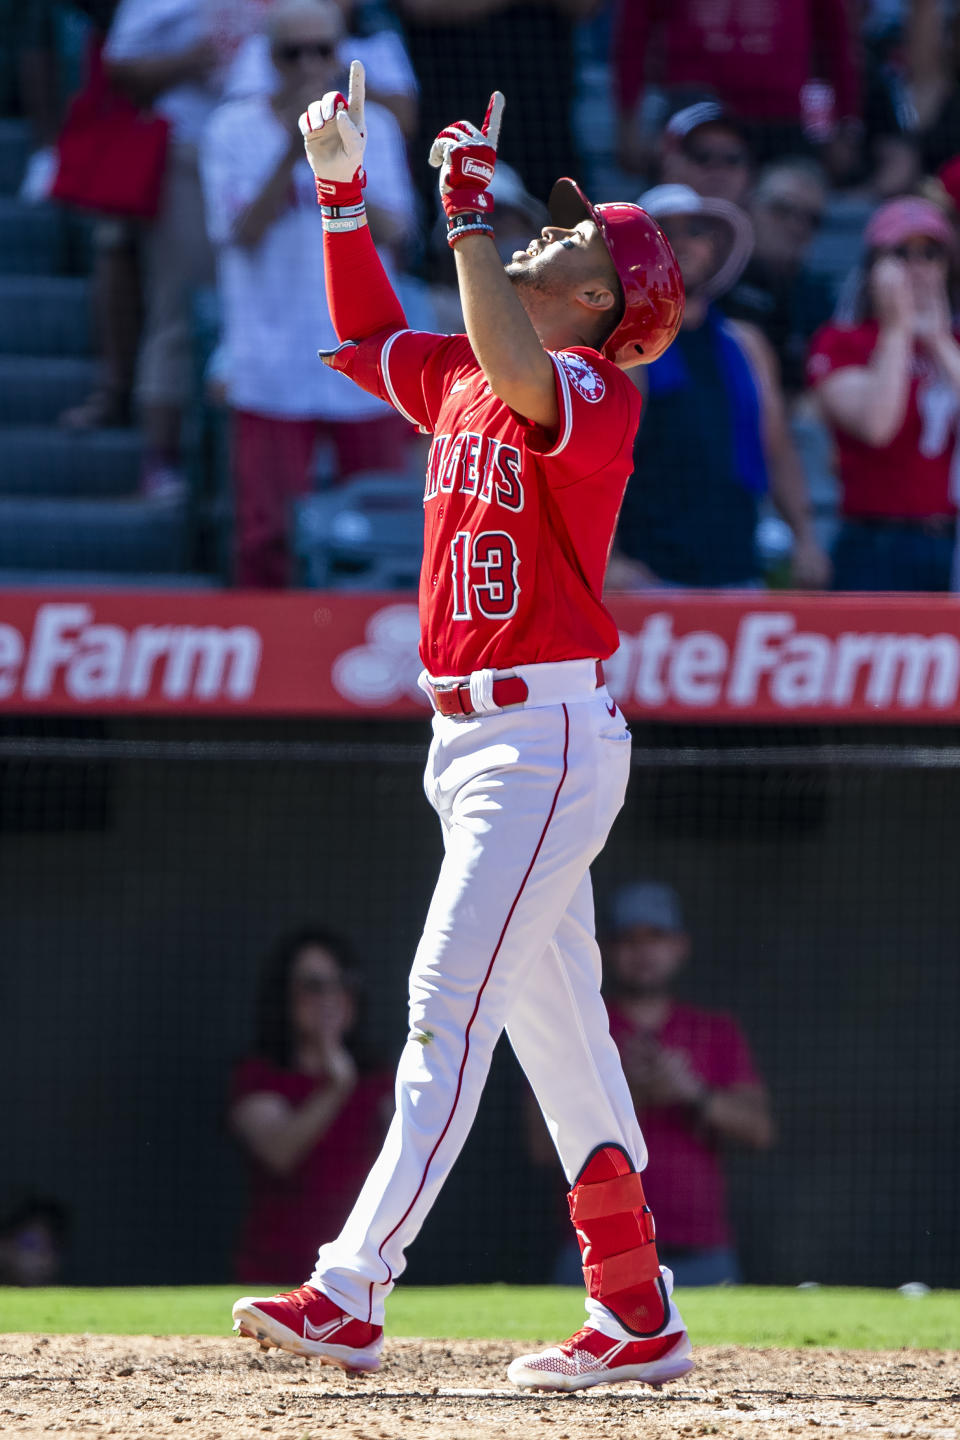 Los Angeles Angels' Livan Soto points skyward after hitting a two-run home run against the Seattle Mariners during the seventh inning of a baseball game in Anaheim, Calif., Sunday, Sept. 18, 2022. (AP Photo/Alex Gallardo)